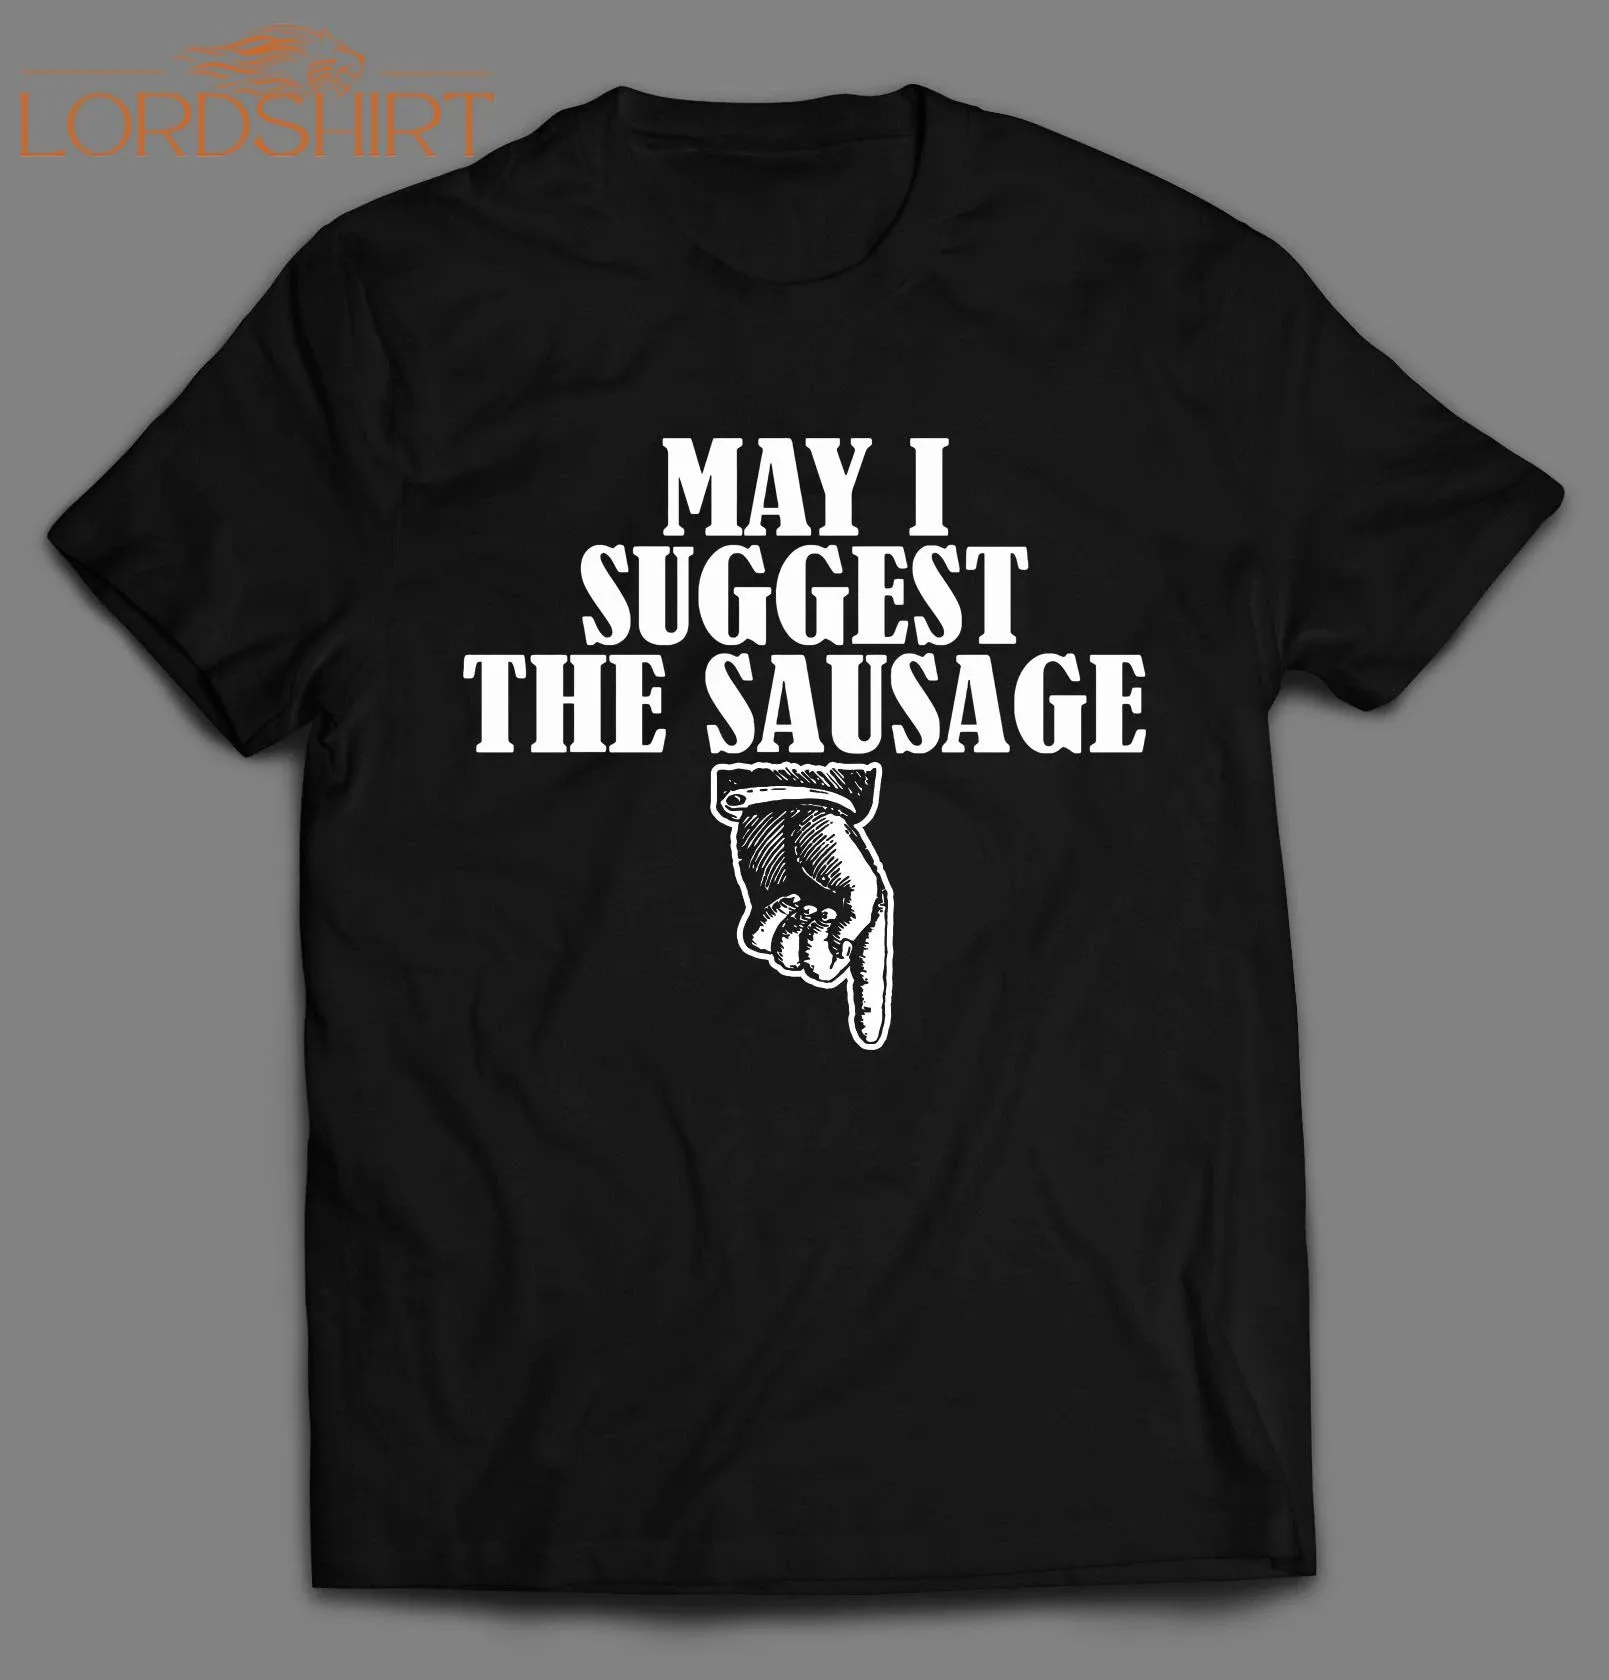 May I Suggest The Sausage Adult Humor Shirt